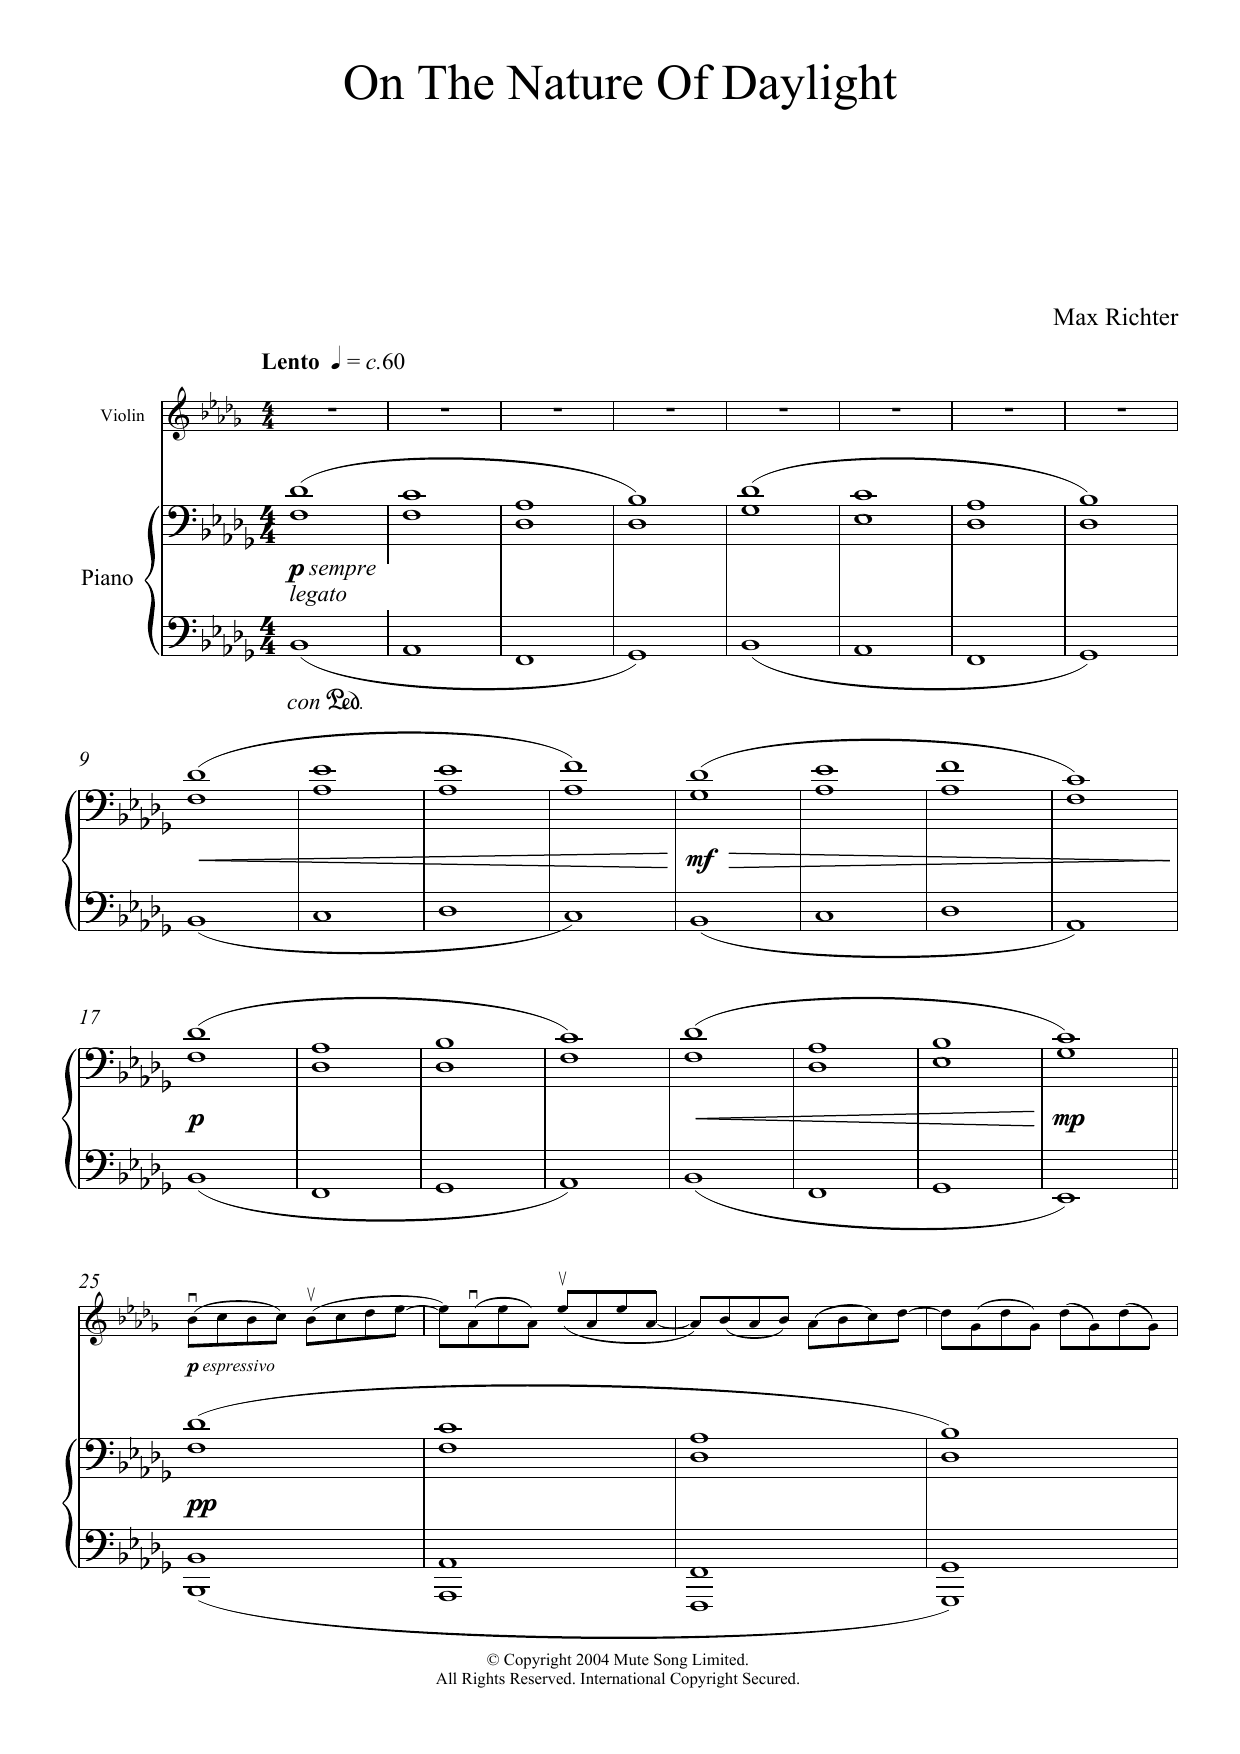 Download Max Richter On The Nature Of Daylight Sheet Music